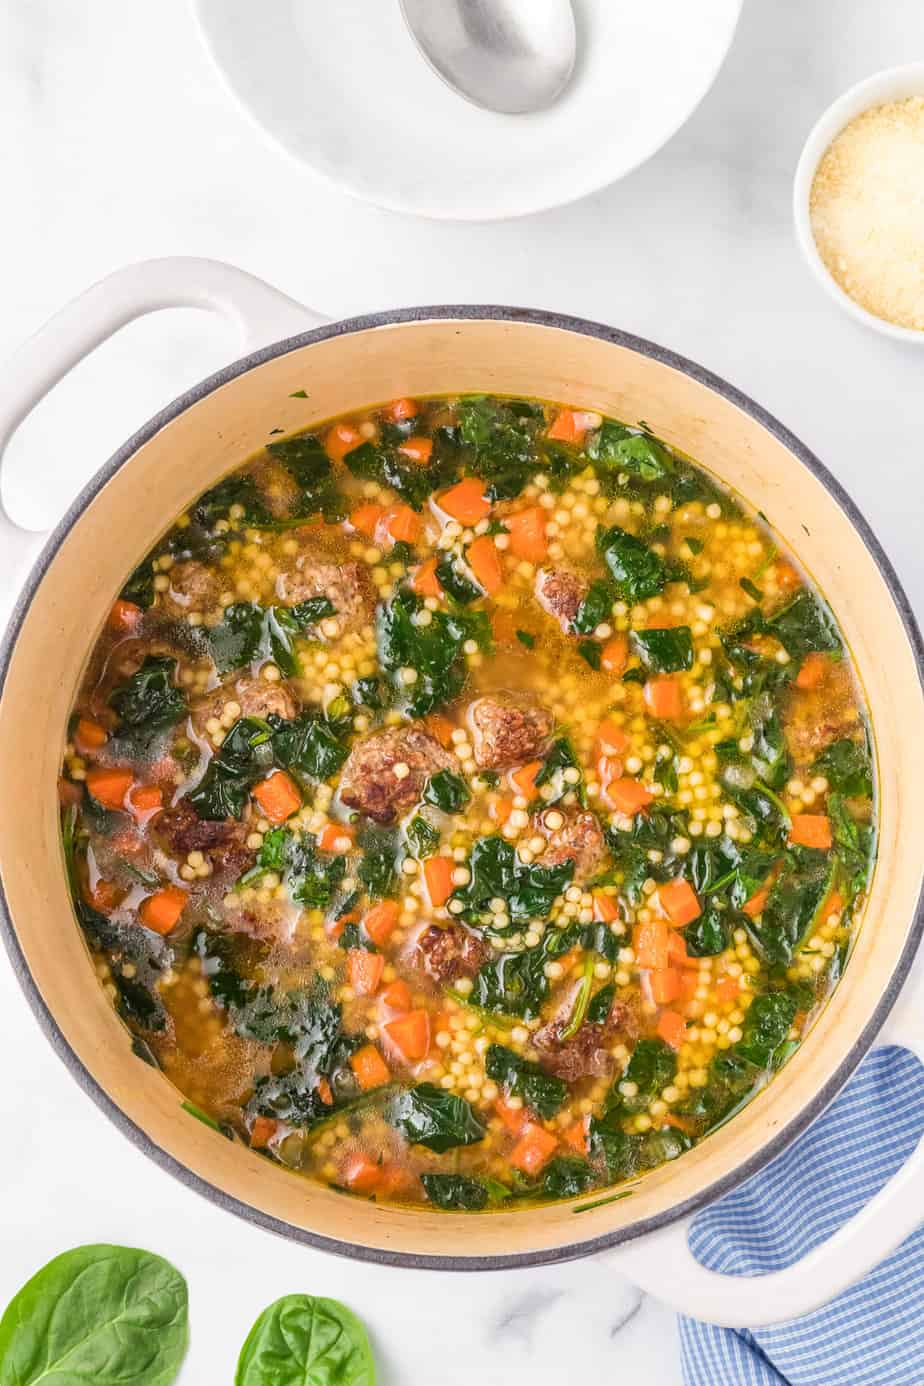 Italian wedding soup in a pot from overhead on a counter with chopped spinach, carrots, meatballs and pasta in the soup from overhead.